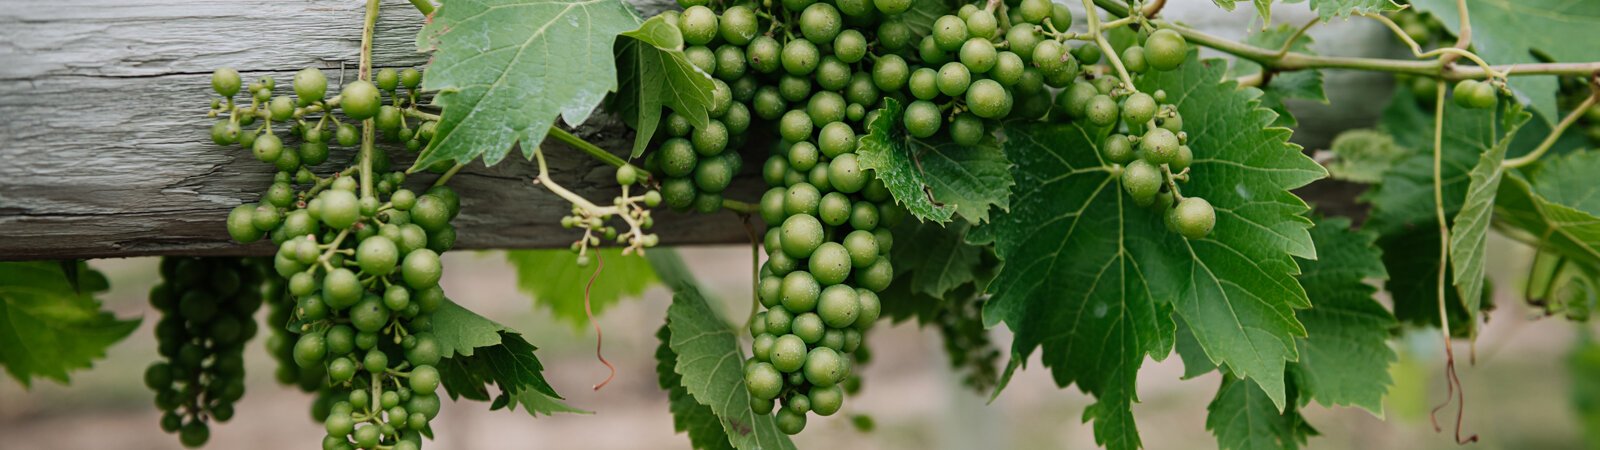 Seyval Blanc grapes at Hartland Winery in Ashley, IN.